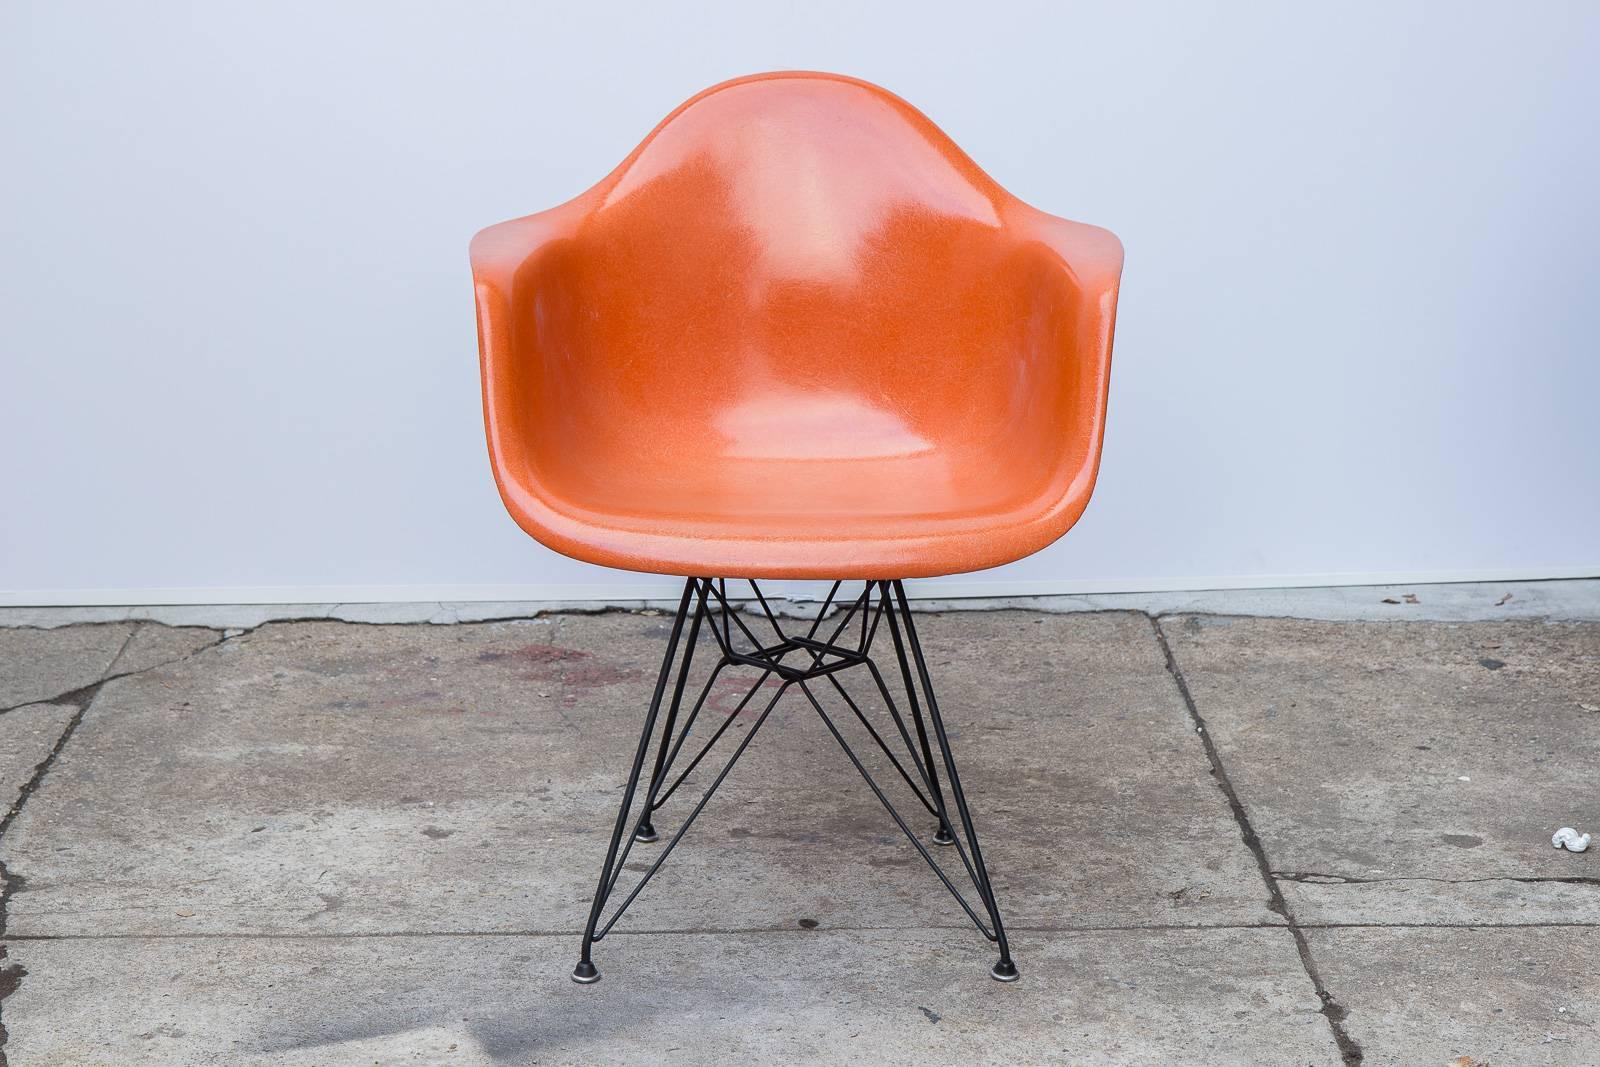 Classic Charles and Ray Eames molded fiberglass armchair in orange on the black Eiffel base for Herman Miller. We have three of these available. Original finish with distinct thread texture. Herman Miller stamp on the underside. Other colors and